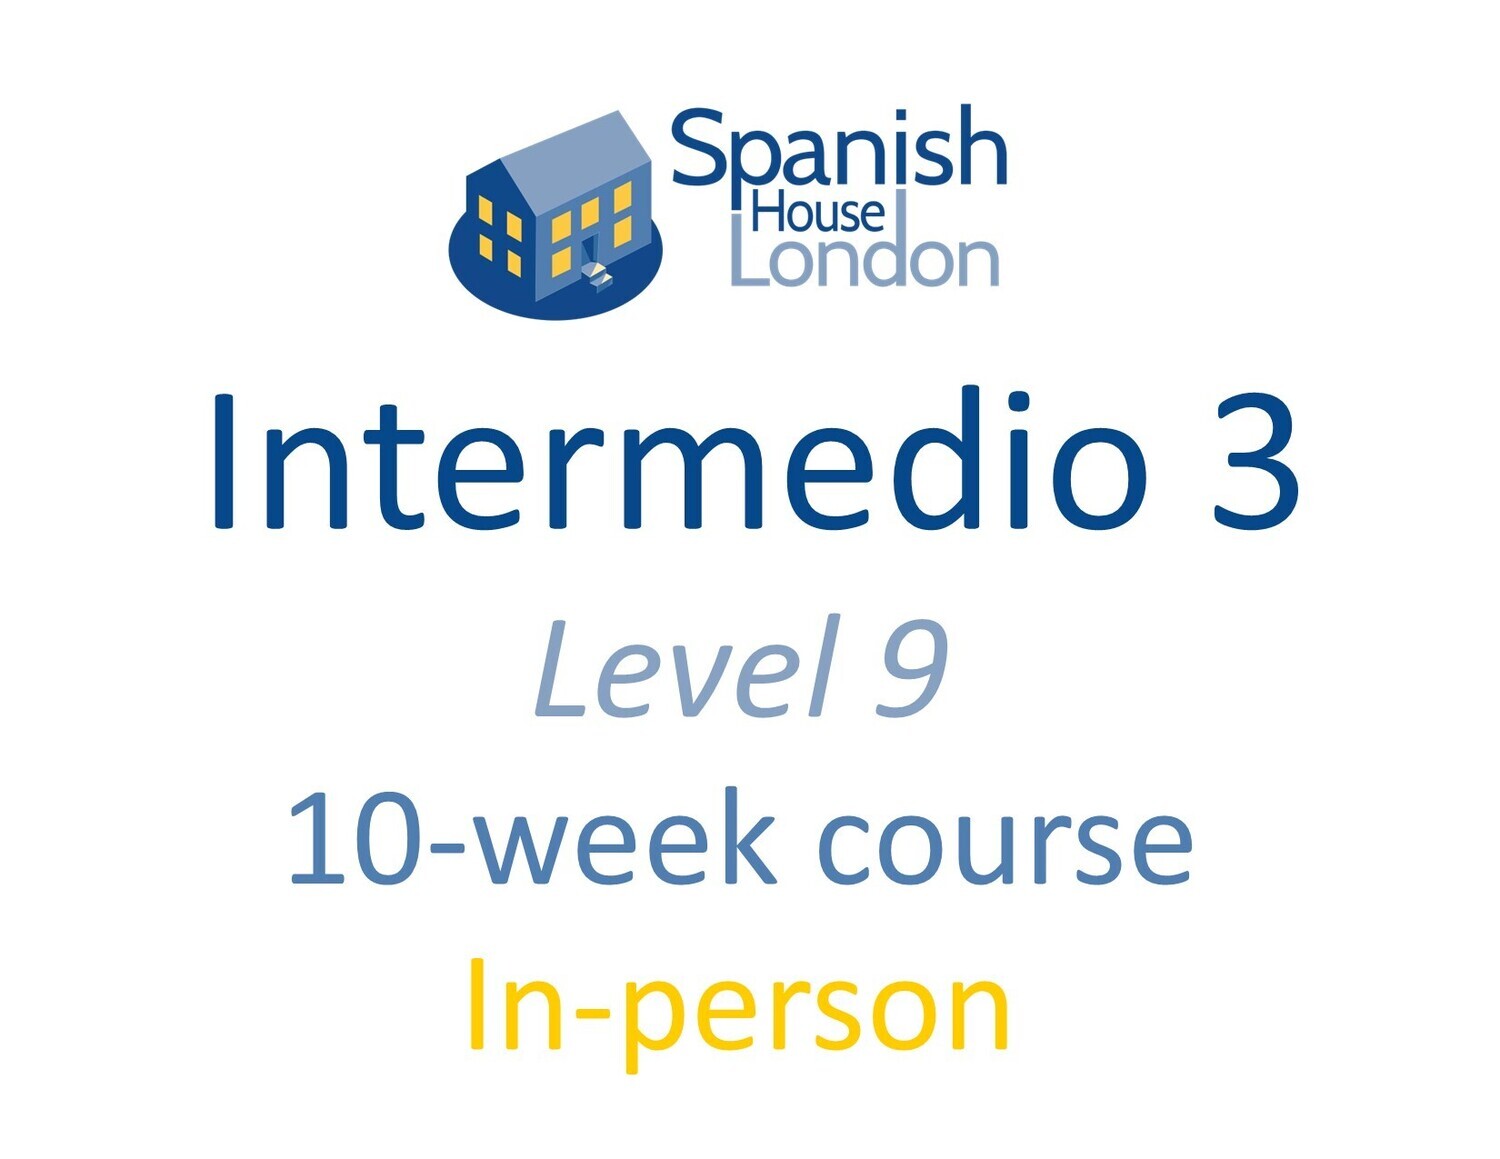 Intermedio 3 Course starting on 8th June at 7.30pm in Clapham North